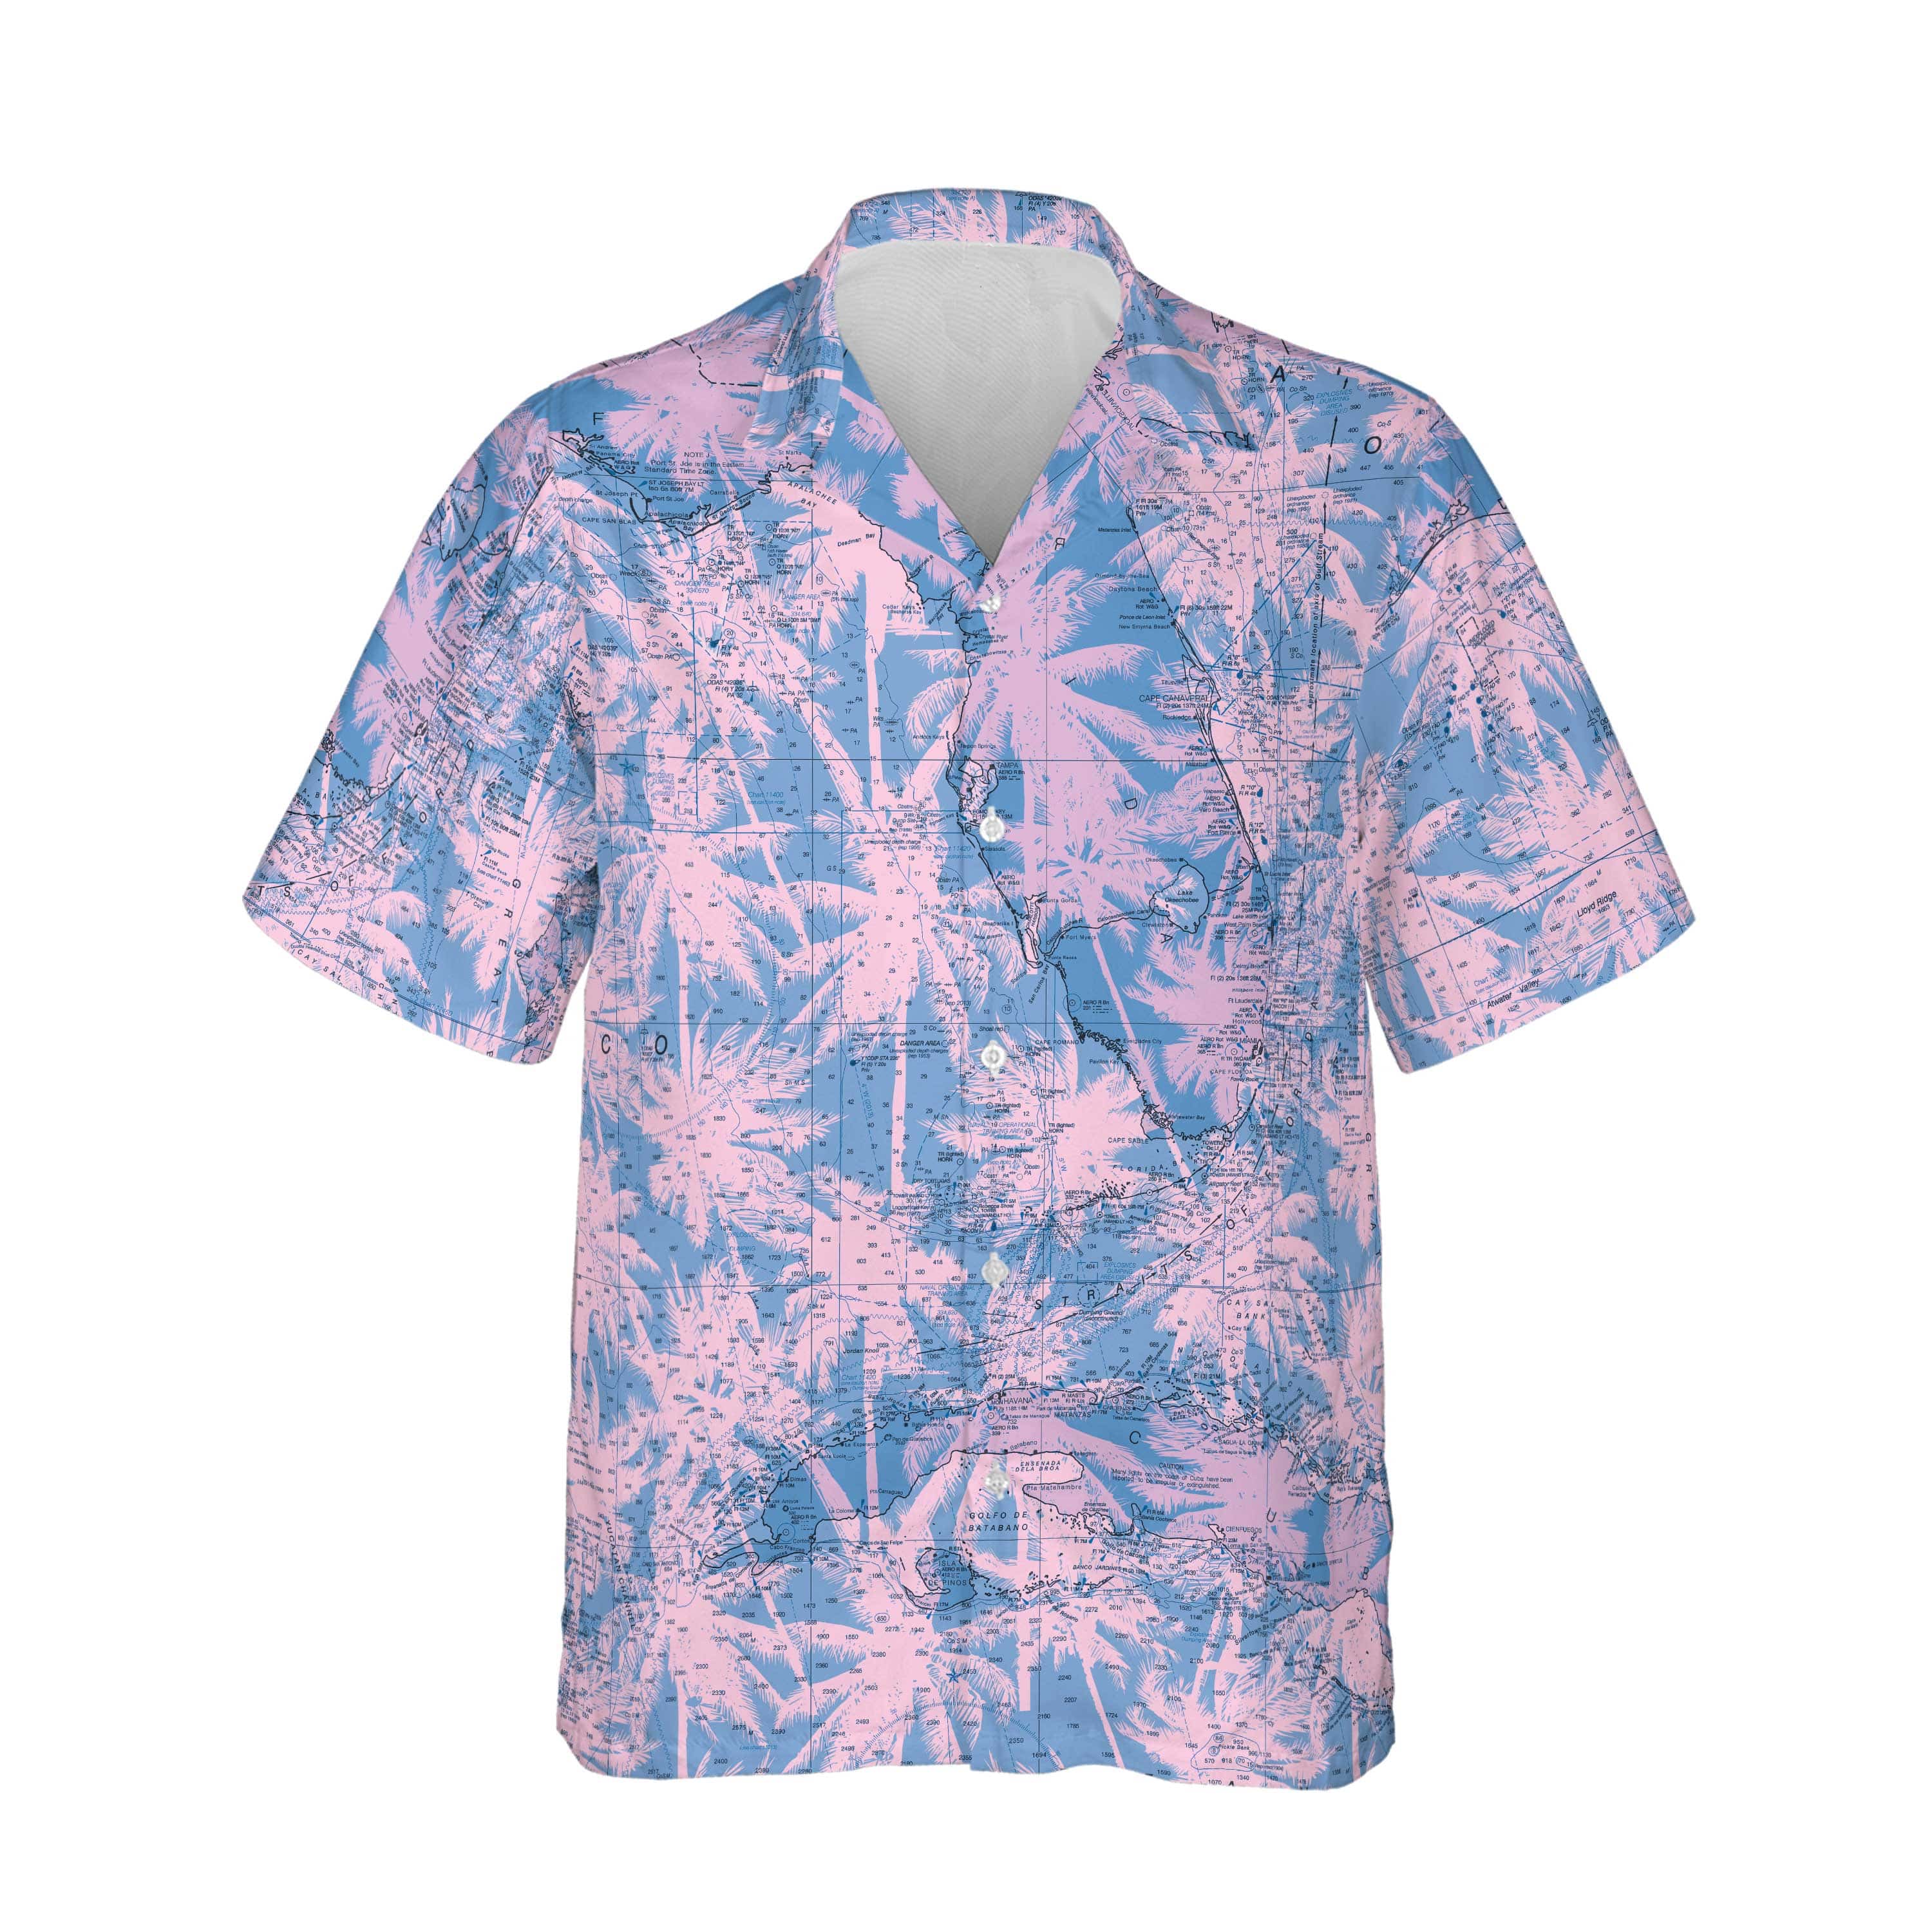 The Blue Palms Gulf of Mexico Shirt